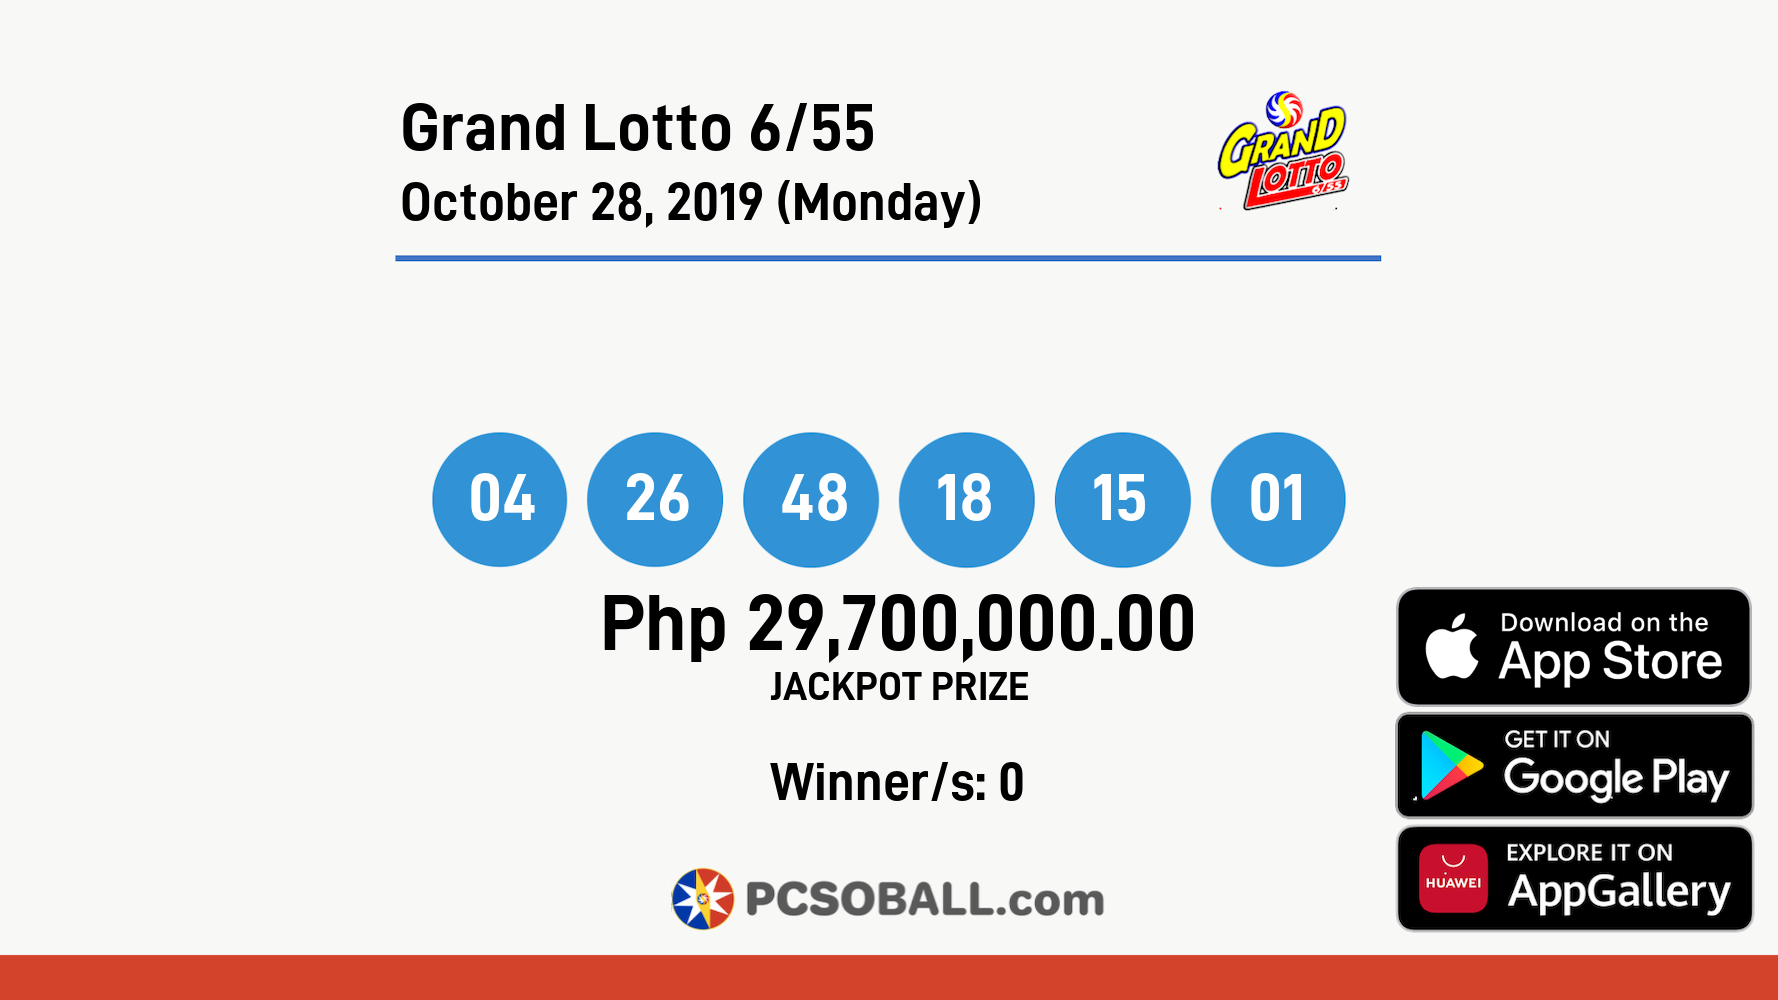 Grand Lotto 6/55 October 28, 2019 (Monday) Result